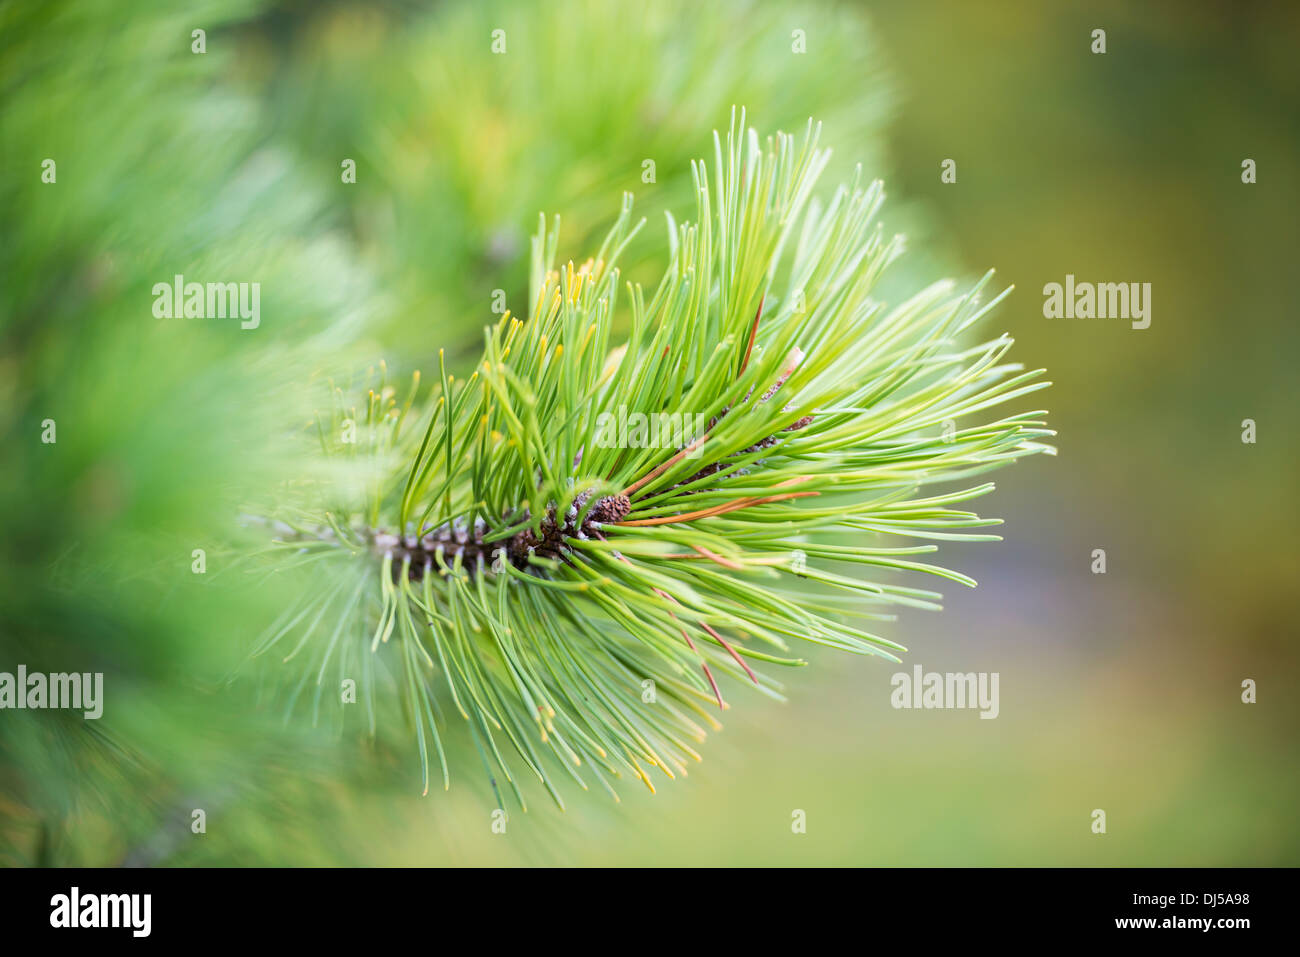 Detail of pine tree in forest, branch with green needles Stock Photo